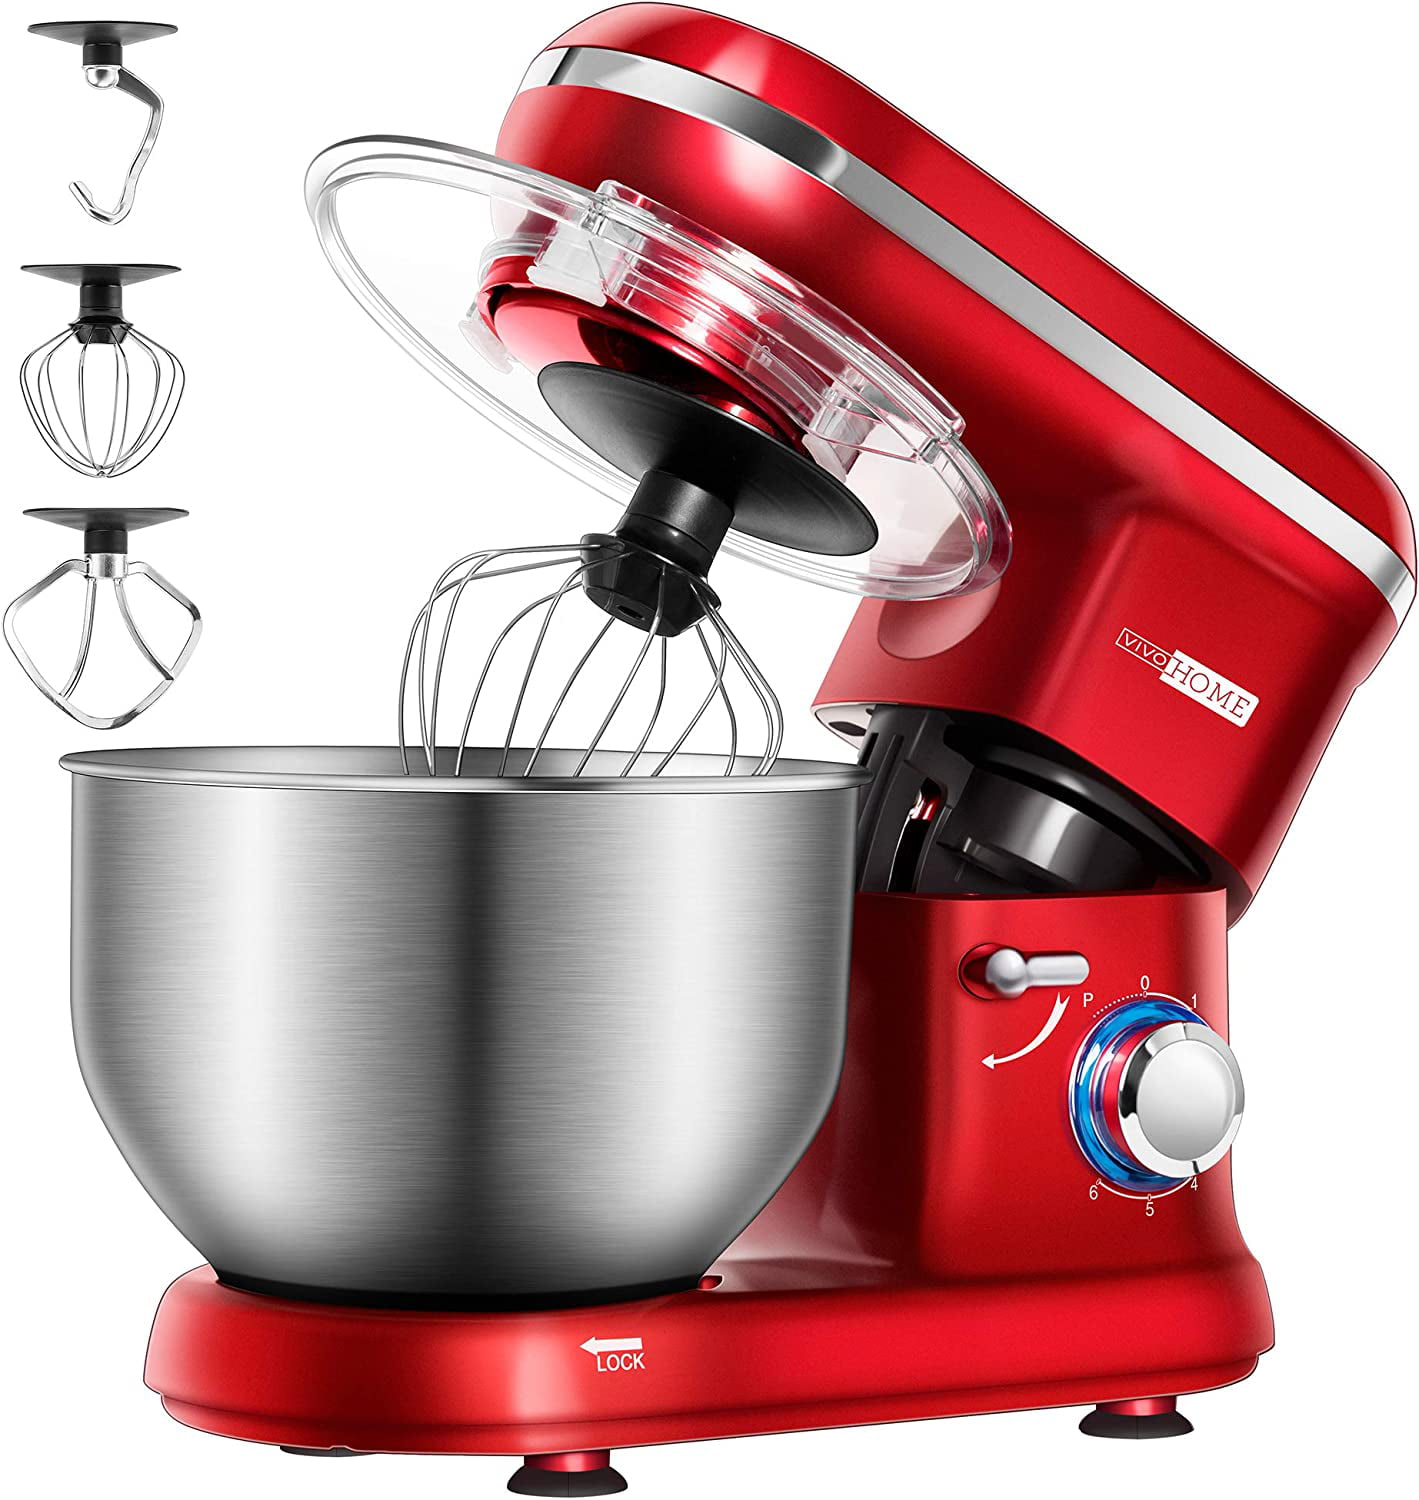 CHEFTRONIC Stand Mixers Tilt-head Mixers Kitchen Electric Dough Mixer for Household Aids 120V/350W 4.2qt Stainless Steel Bowl 